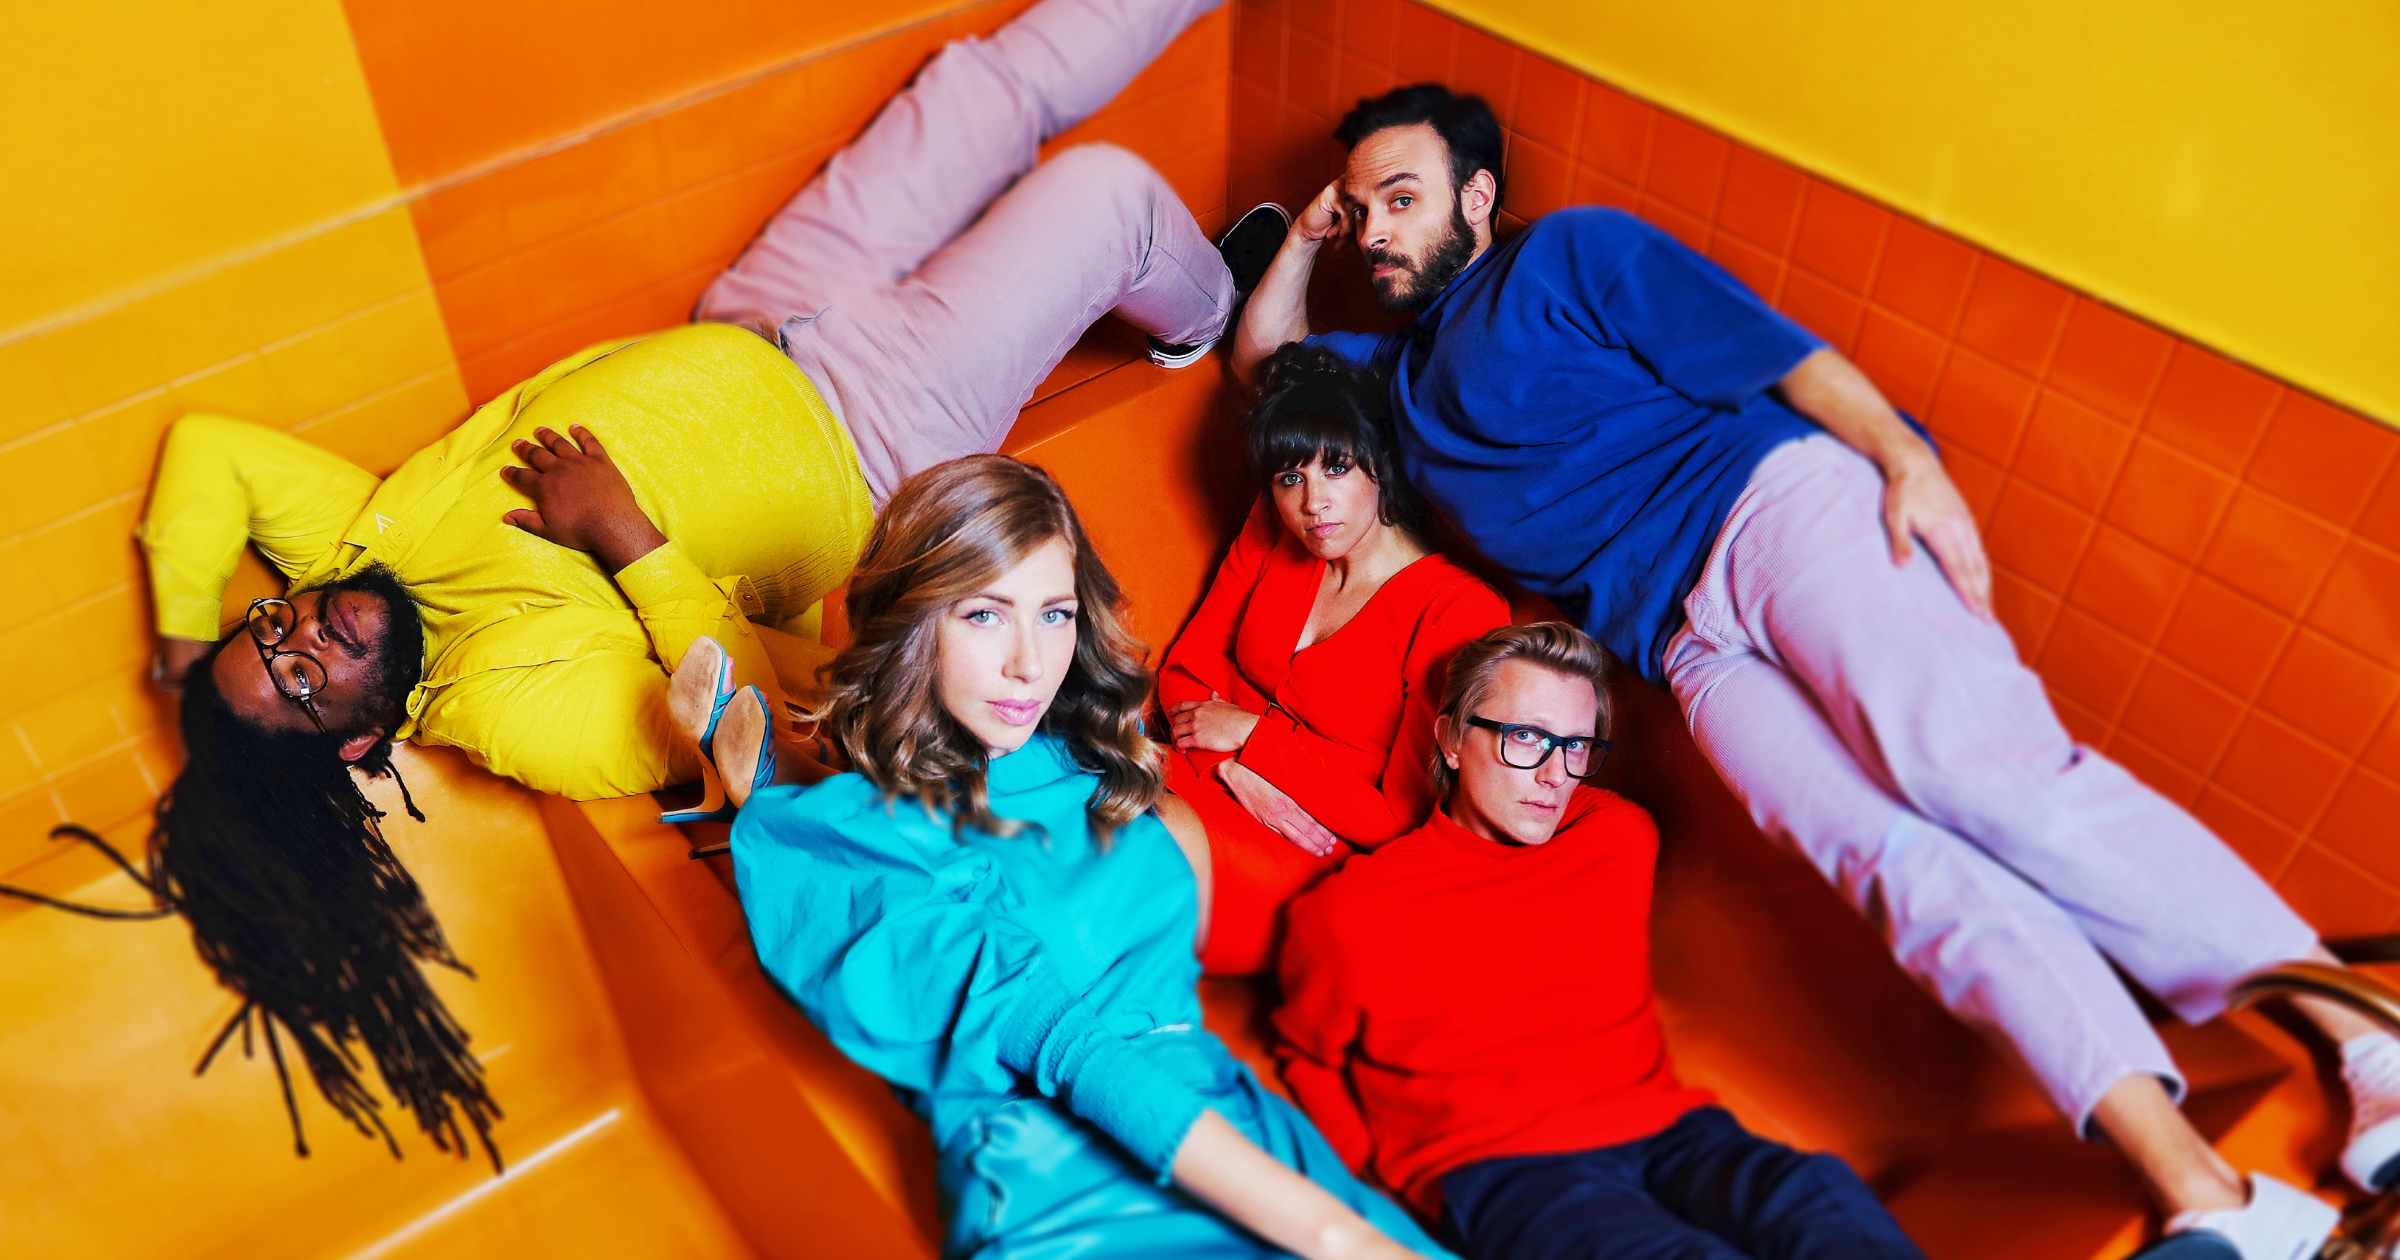 The Show On The Road – Lake Street Dive